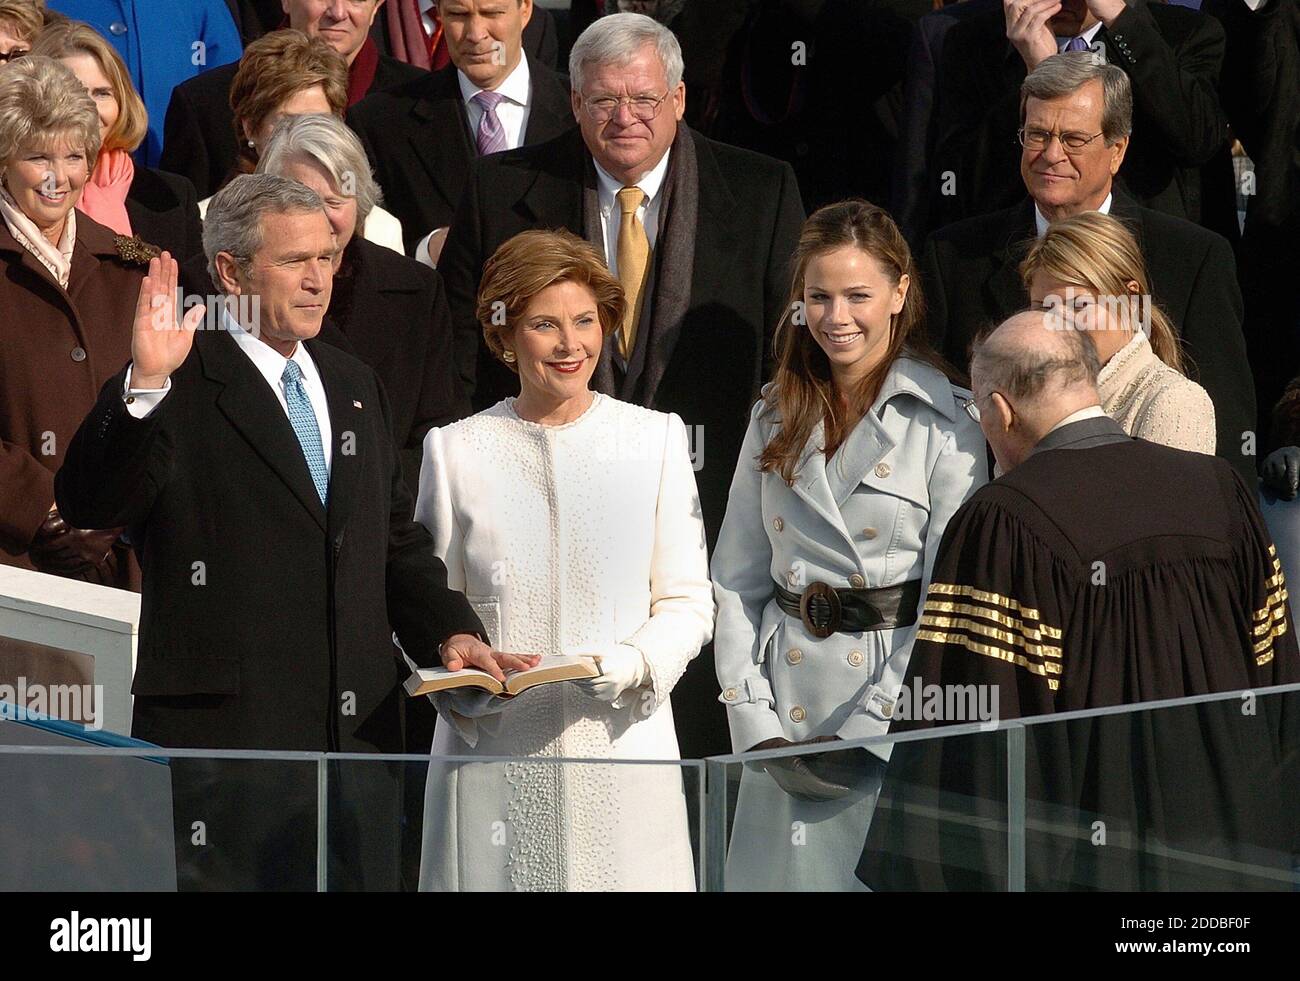 NO FILM, NO VIDEO, NO TV, NO DOCUMENTARY - U.S. President George W. Bush takes the Oath of Office from Supreme Court Justice William Rehnquist during Inauguration ceremonies on Capitol Hill in Washington, January 20, 2005, as First Lady Laura Bush, center, looks on with daughters Barbara, second from right and Jenna, right. Washington, DC, USA, on January 20, 2005. Photo by George Bridges/US News Story Slugged/KRT/ABACA. Stock Photo